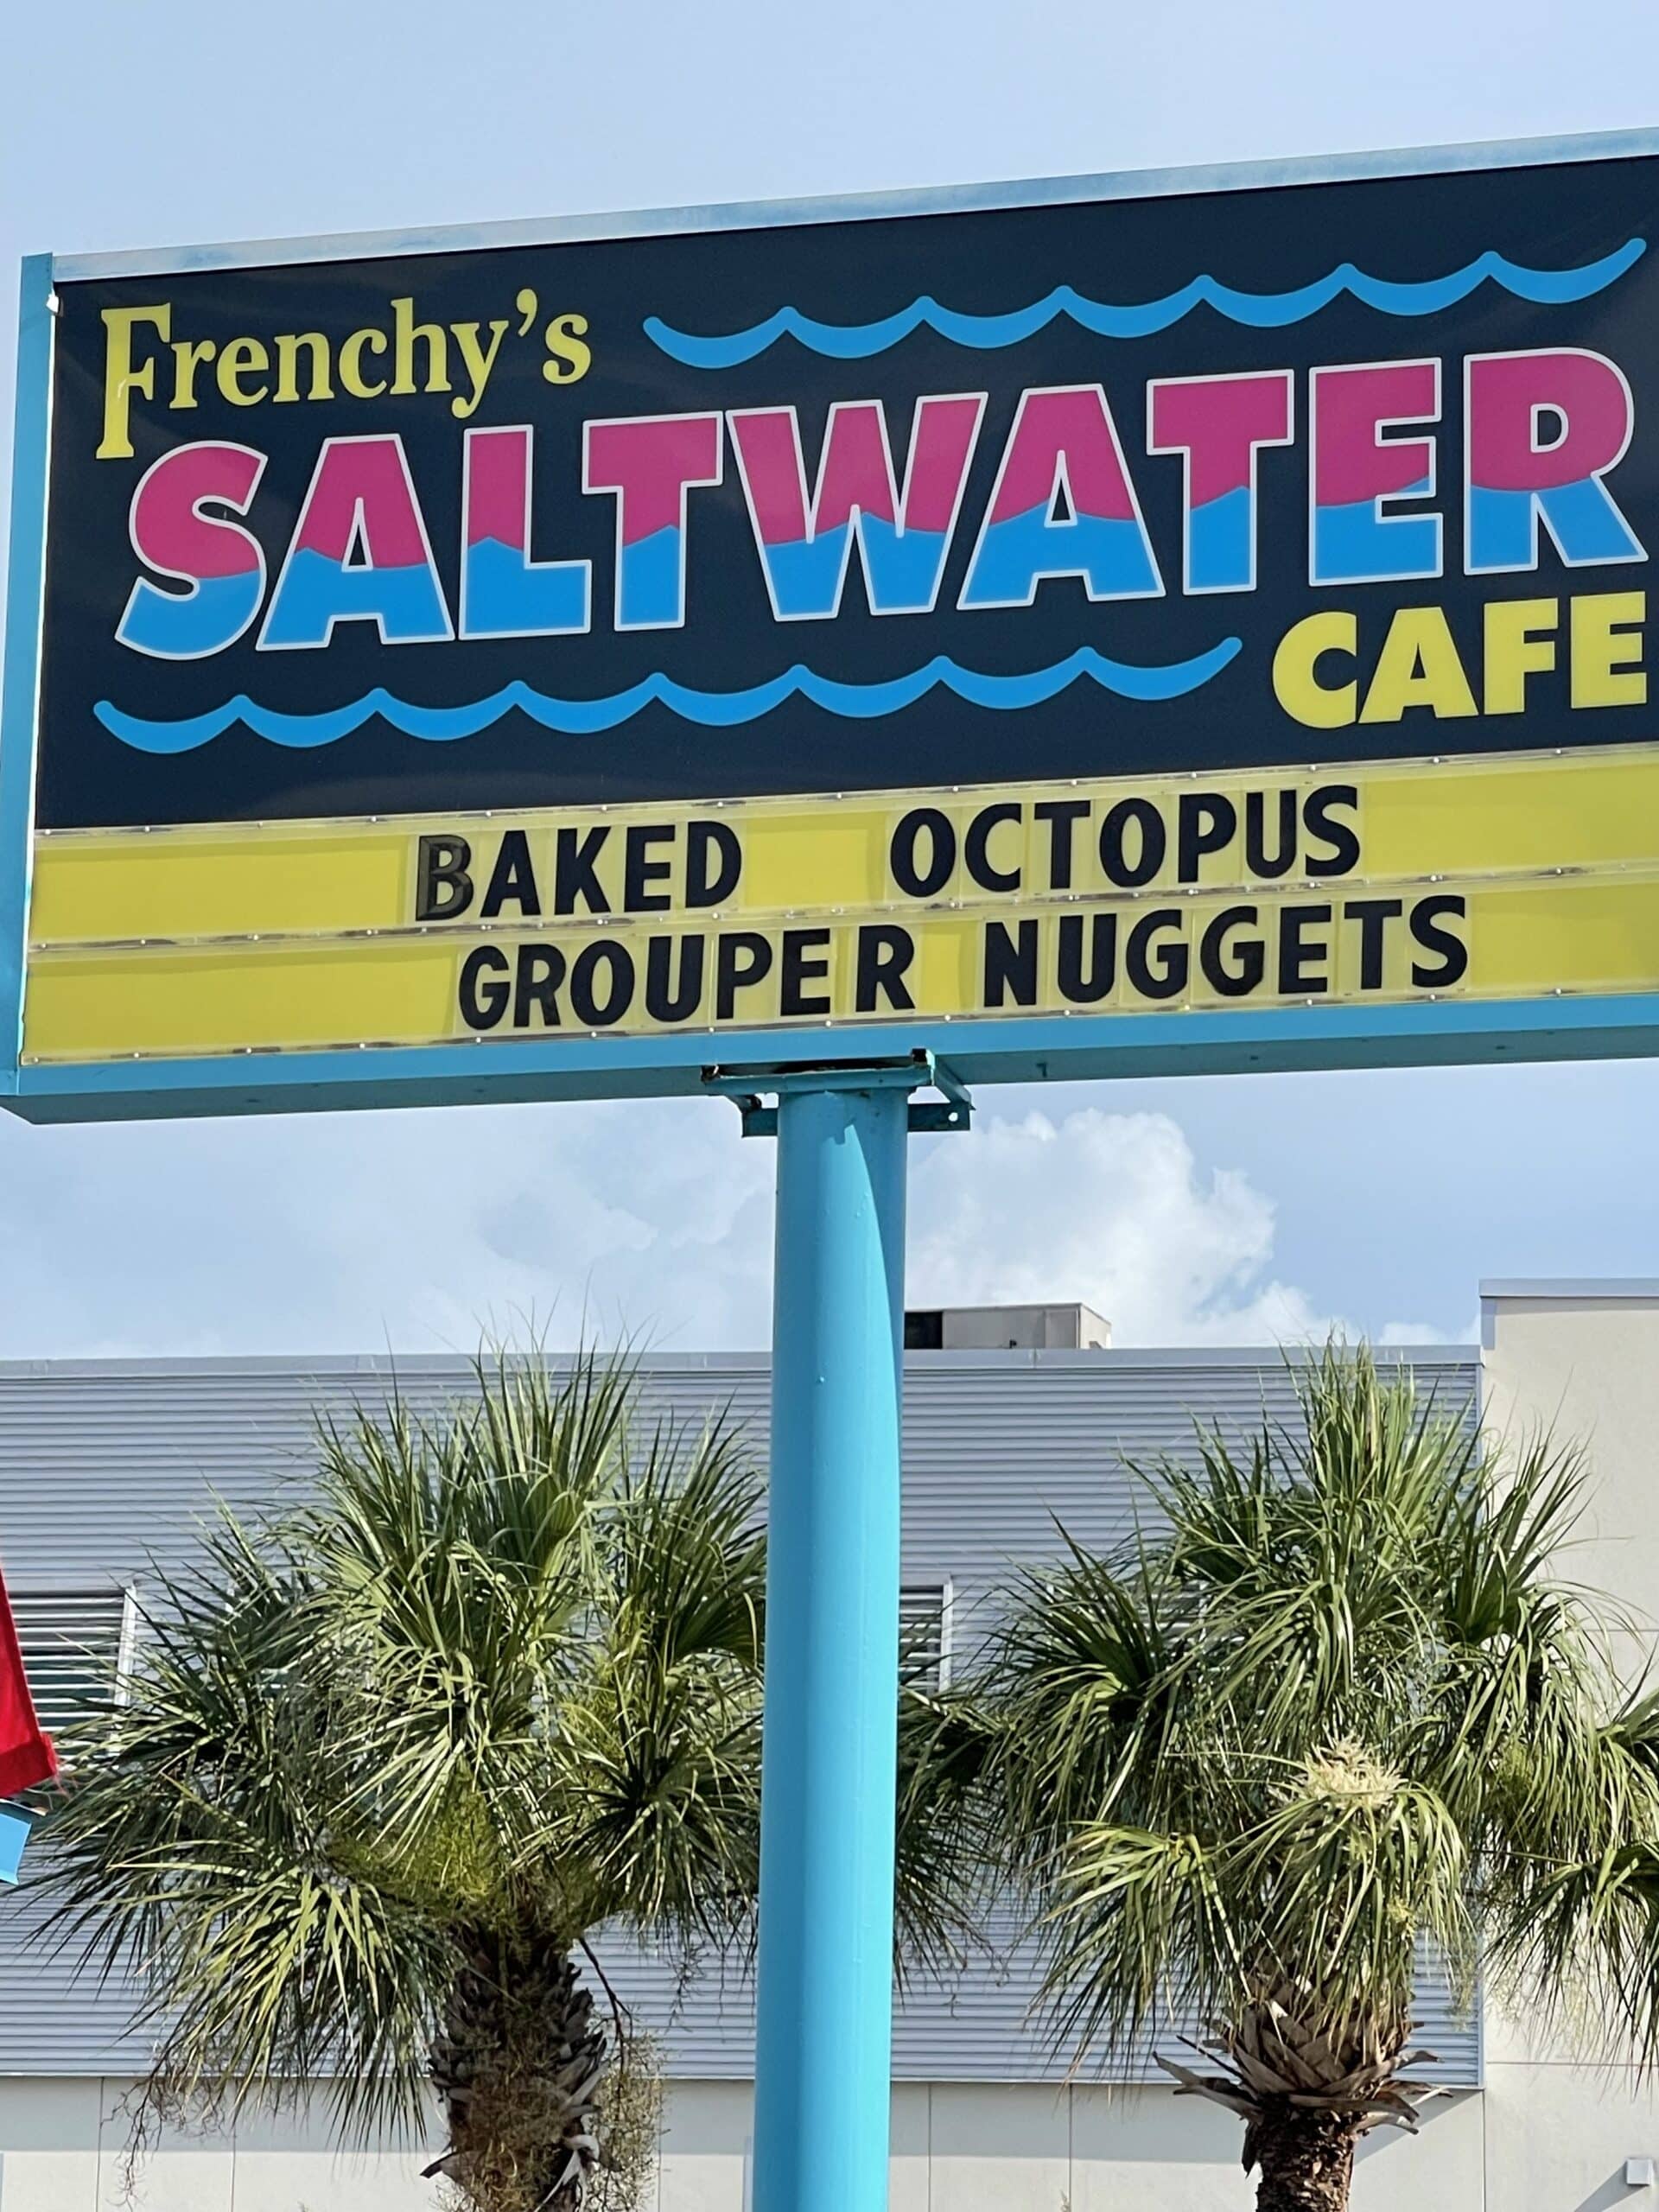 Frechy's Saltwater Cafe in Clearwater Beach, Florida.